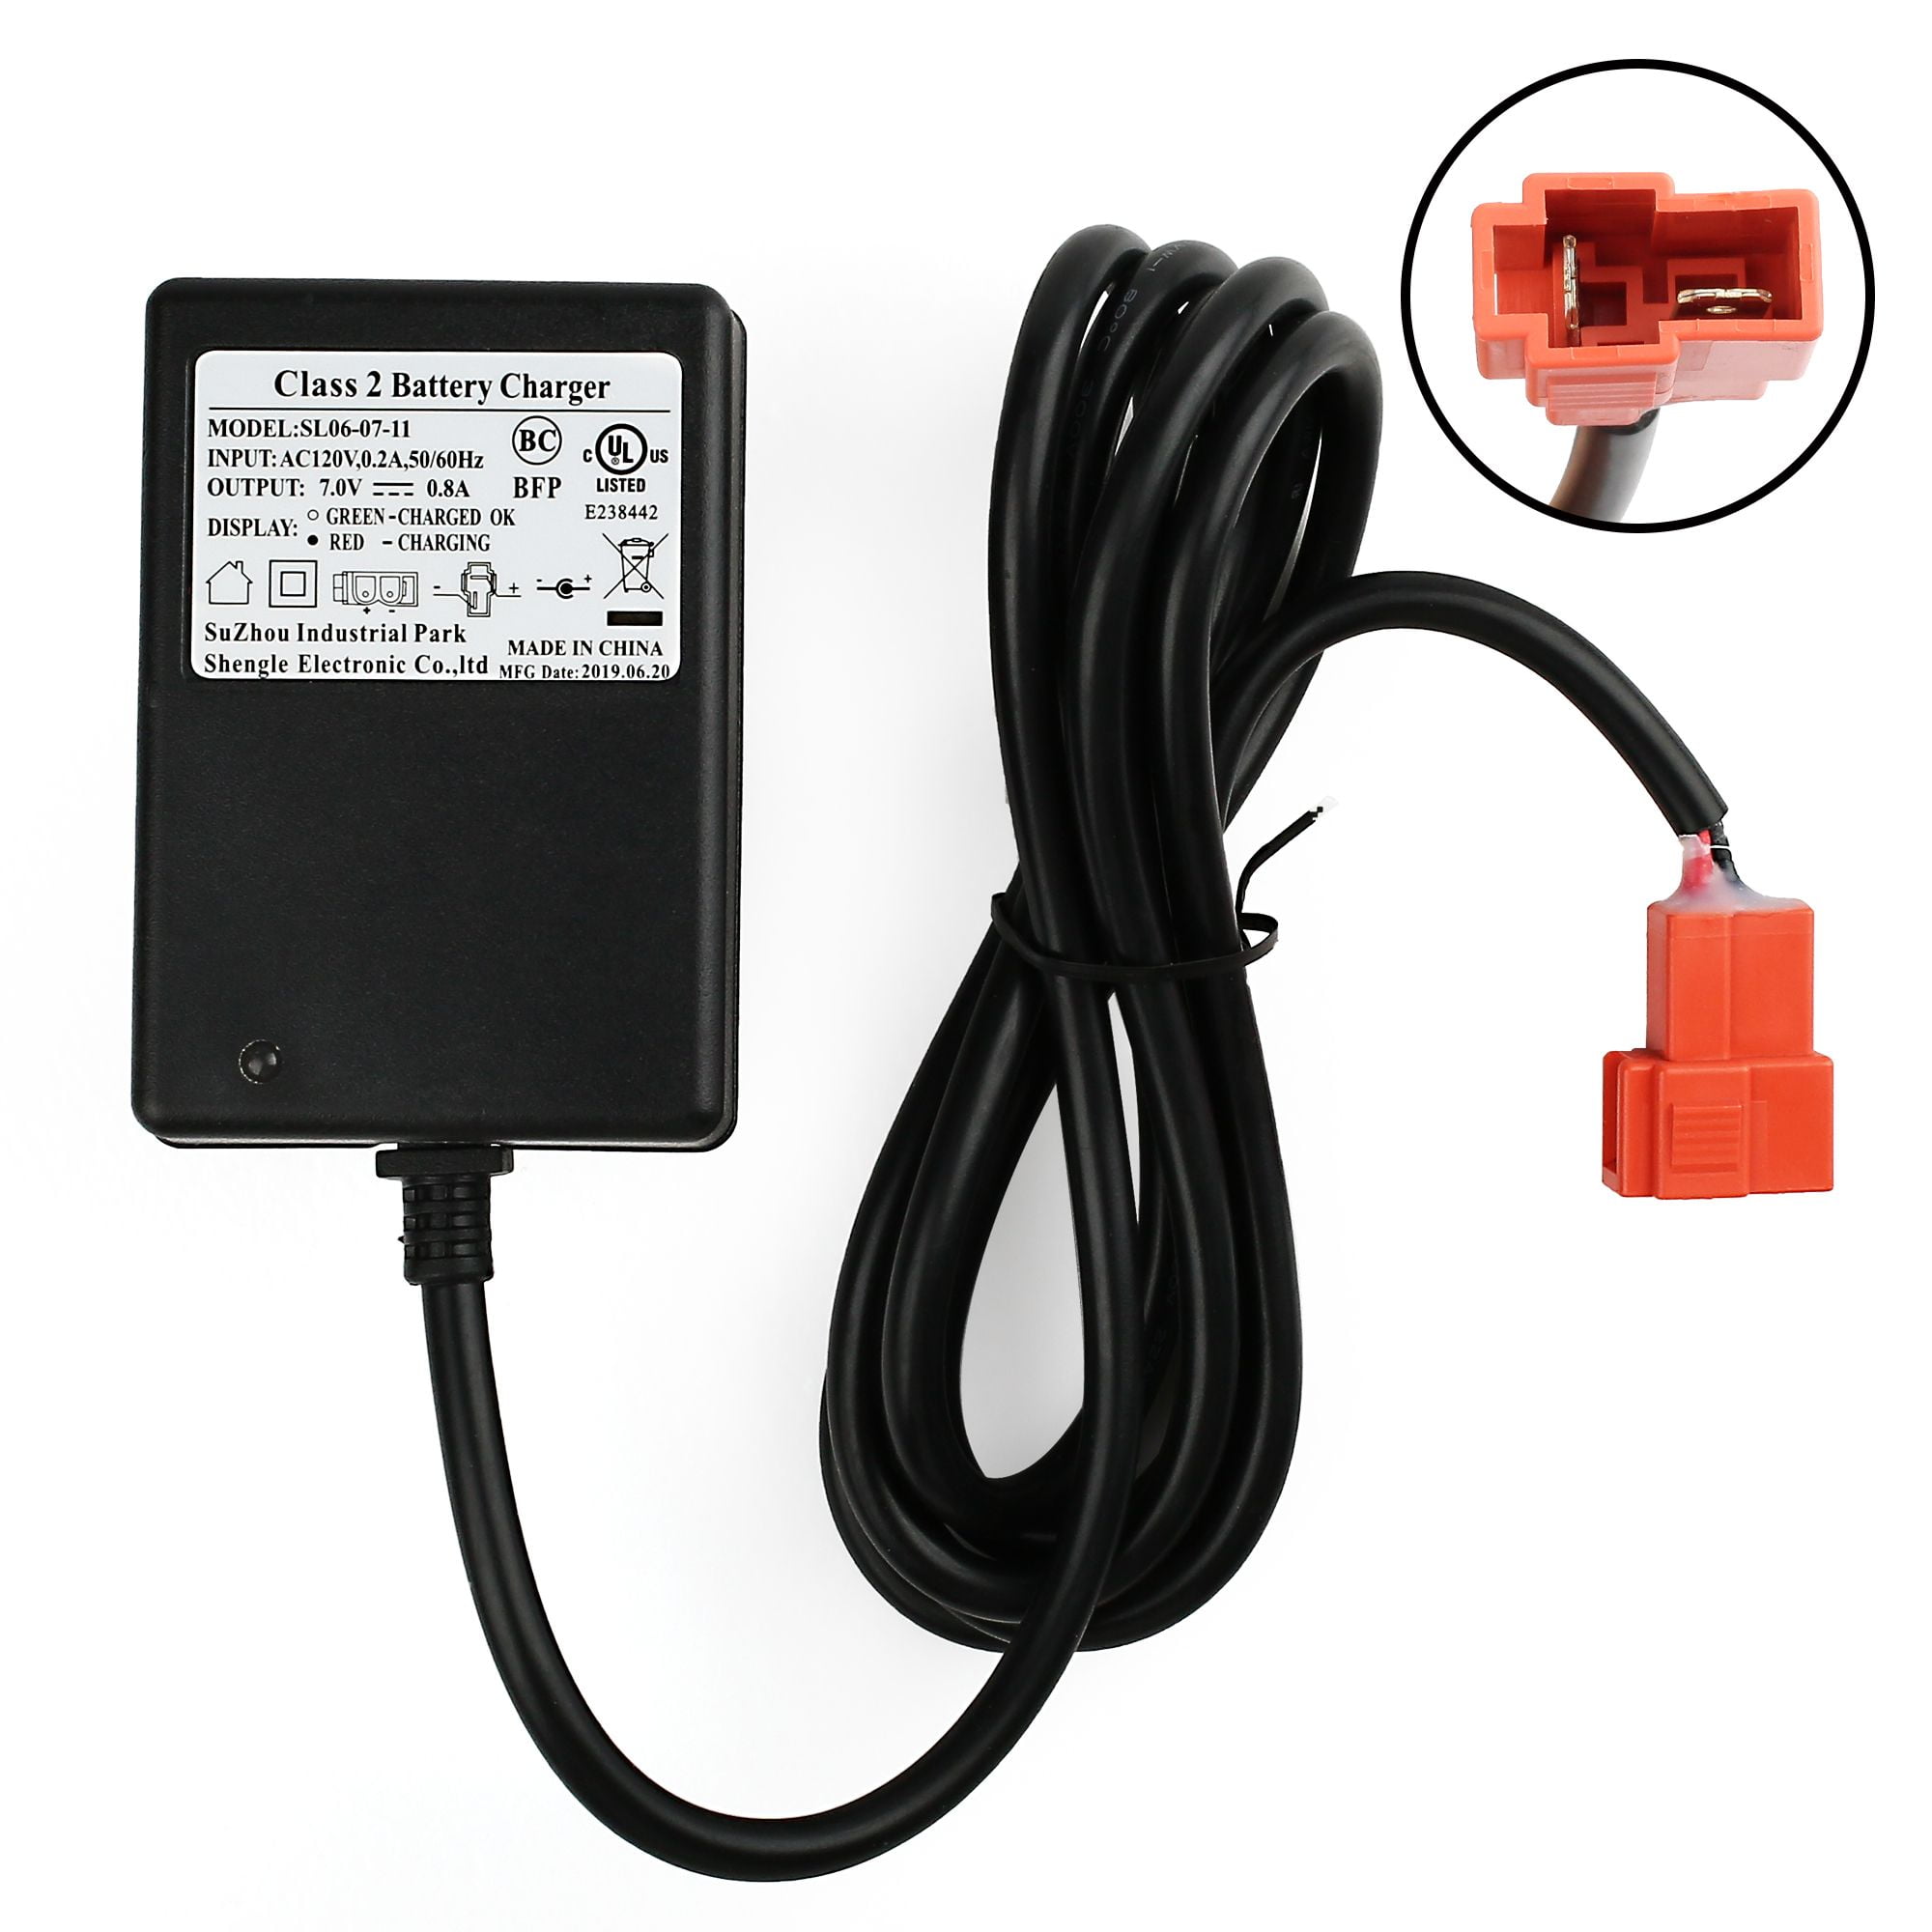 OEM Wall Charger AC Adapter for Kt1147tr Kid Trax Disney Fairies Quad Ride 6v for sale online 